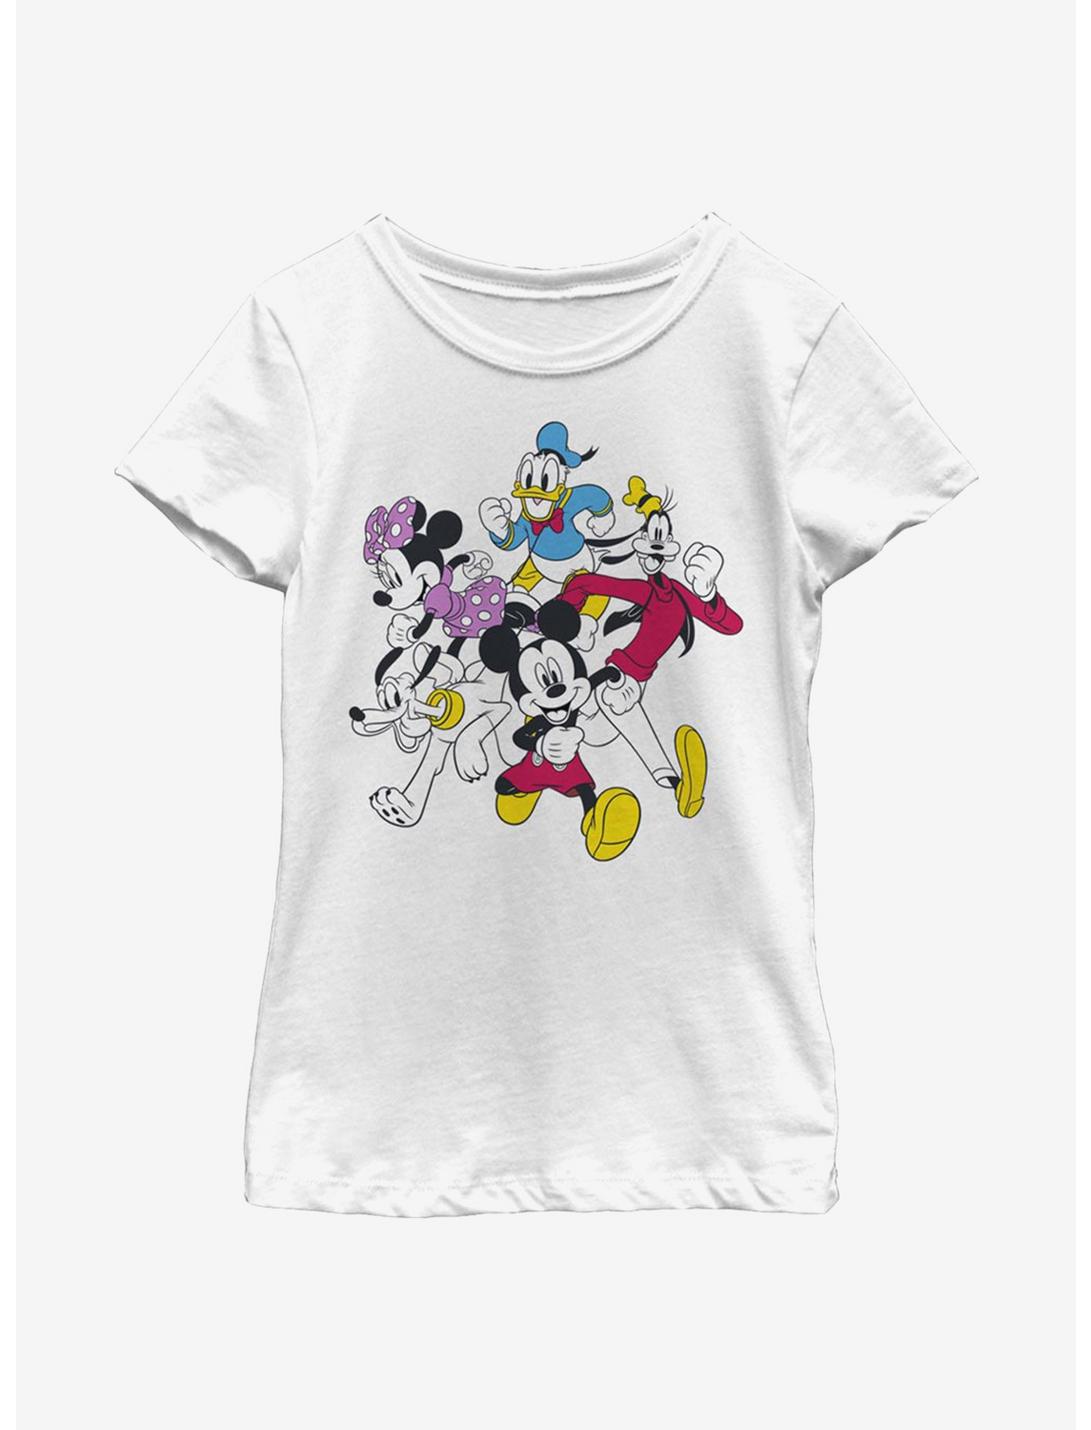 Disney Mickey Mouse And Friends Youth Girls T-Shirt, WHITE, hi-res